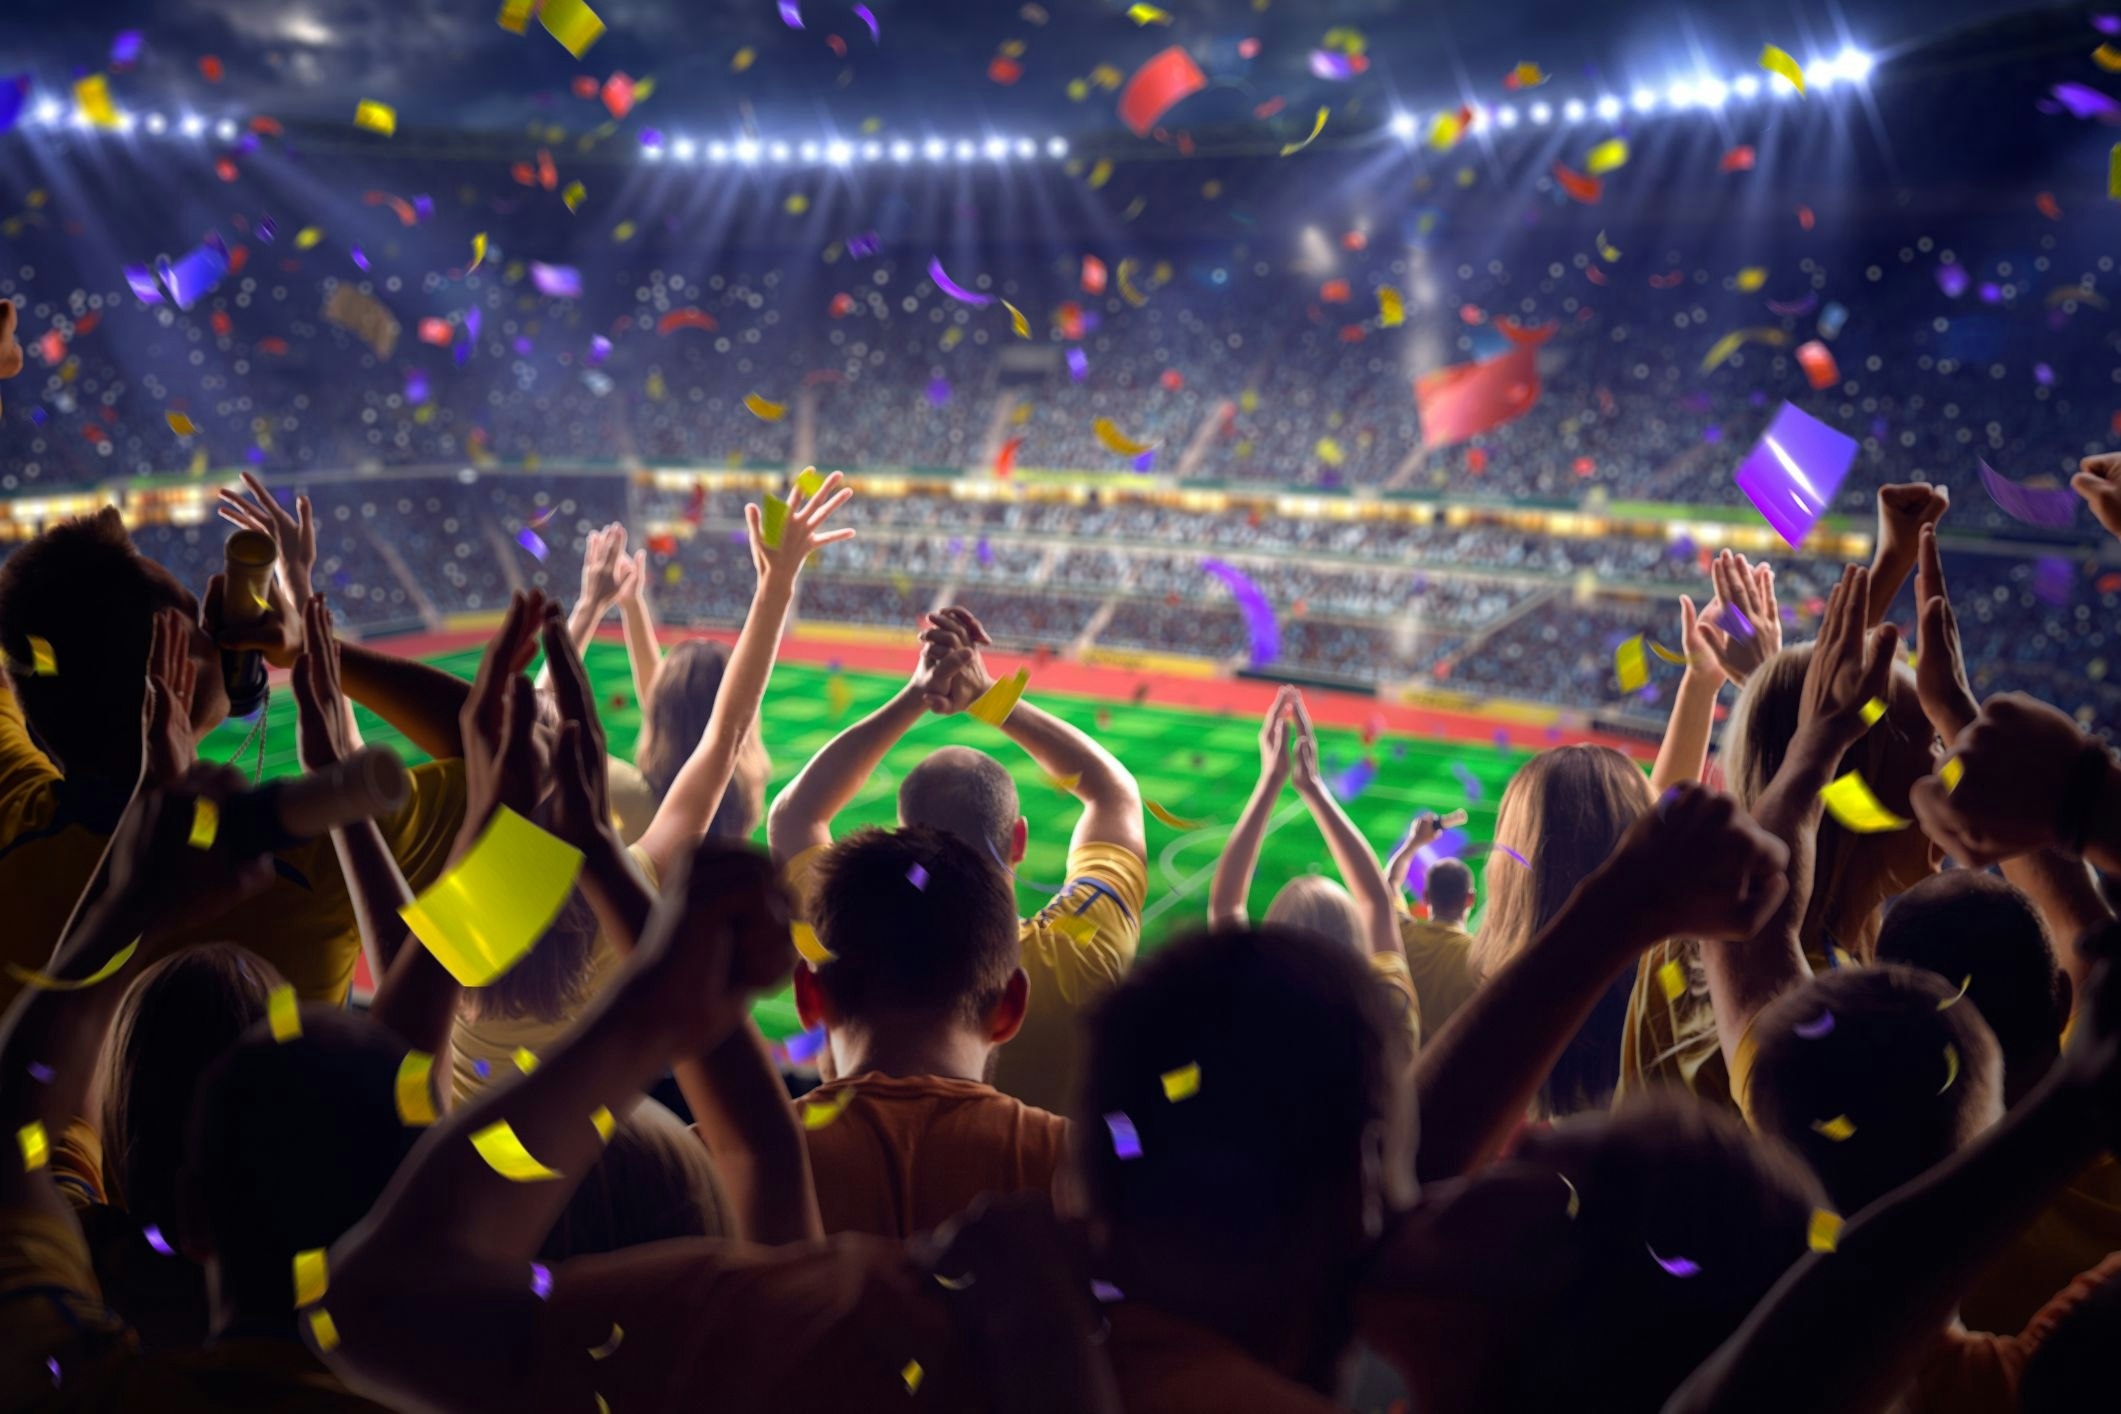 Going to watch football is a great way to participate in Australian culture. [Source: Shutterstock]
